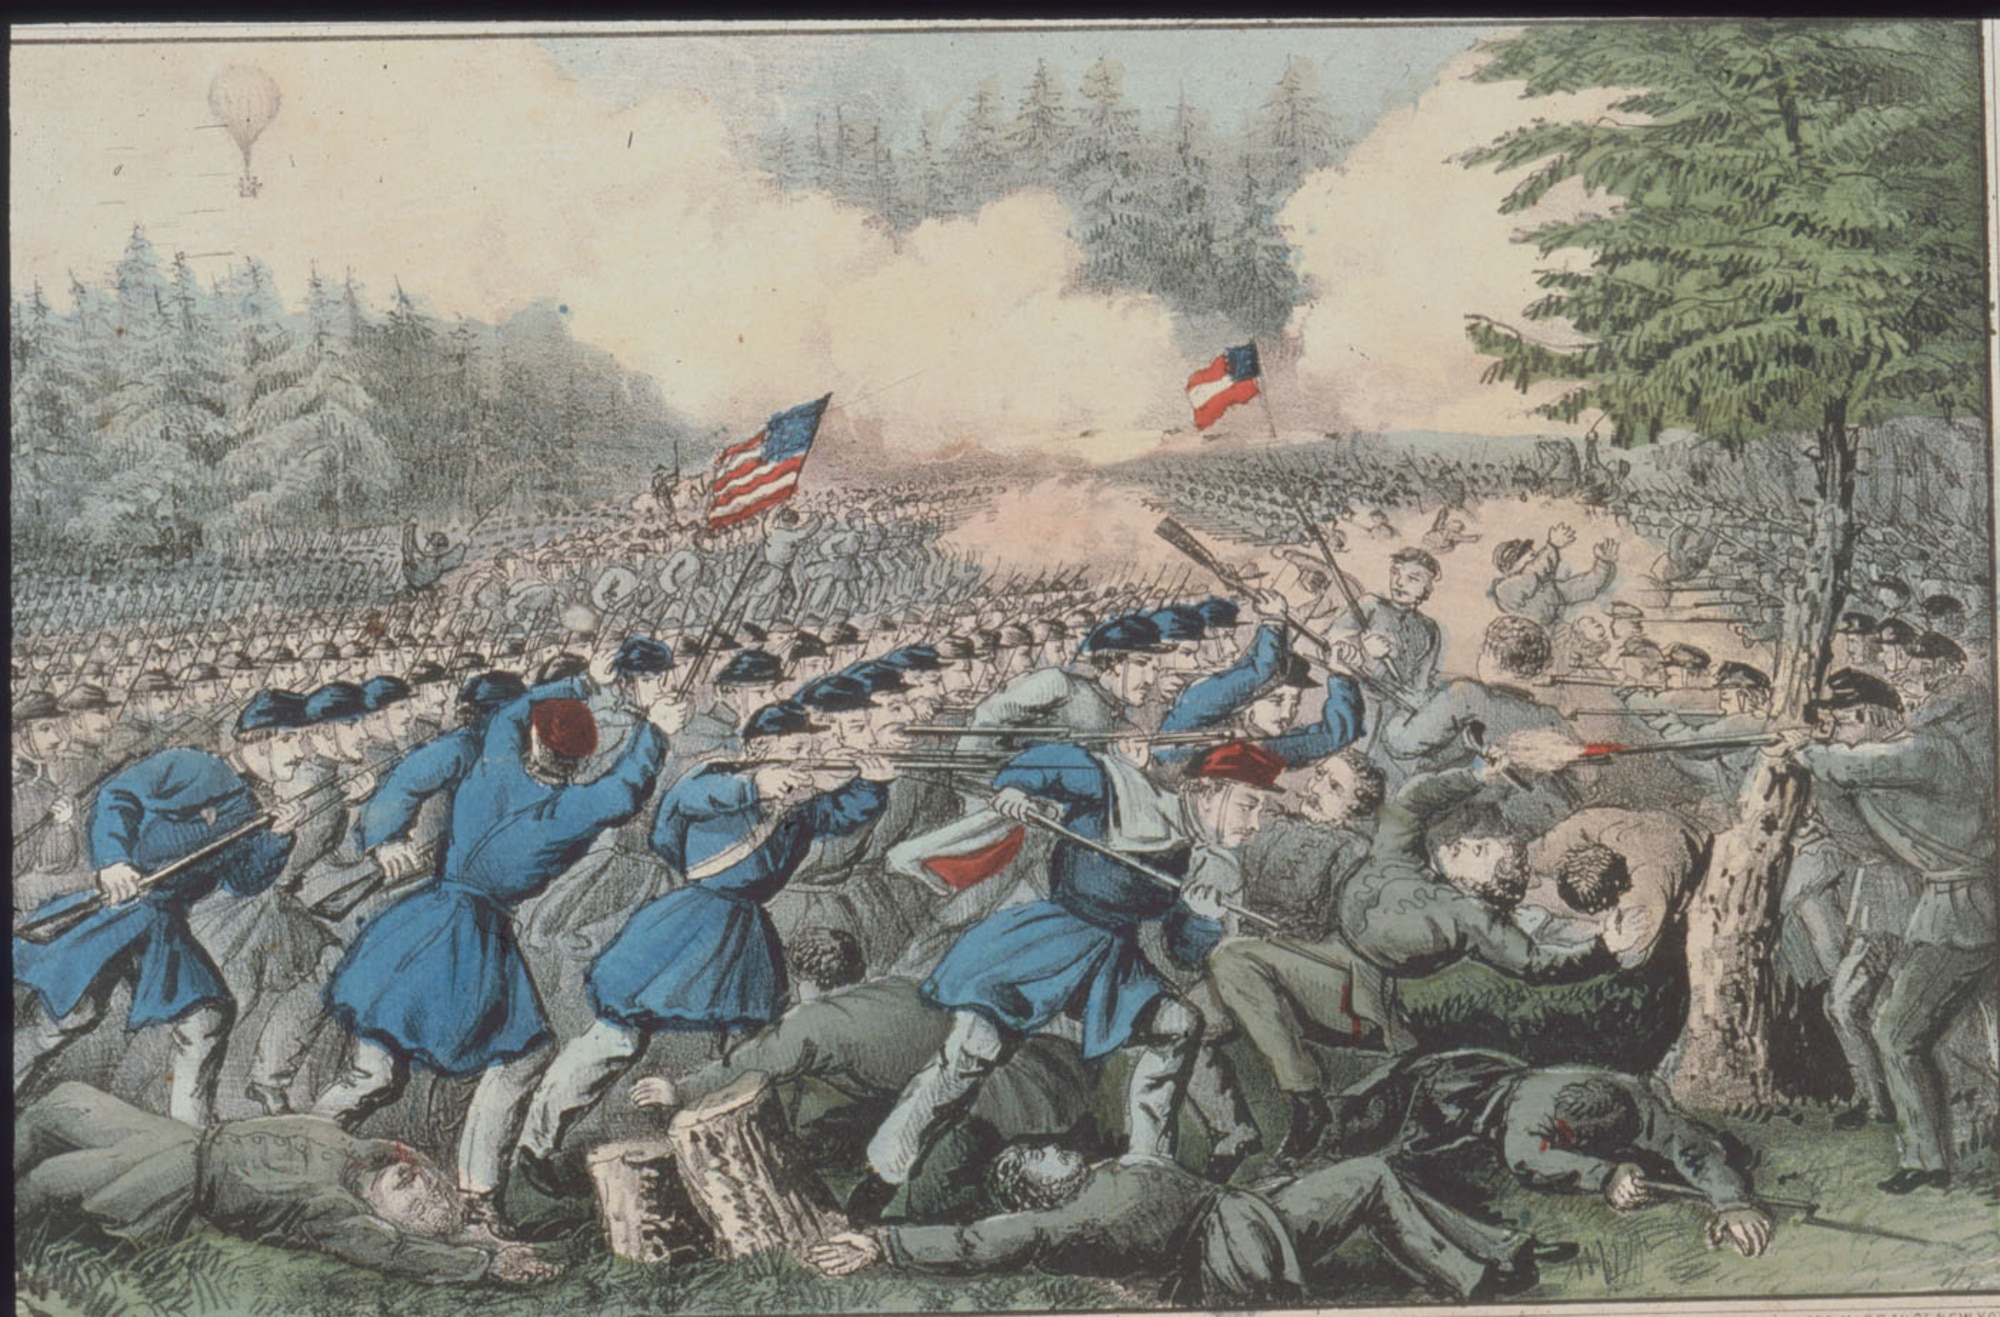 The Battle of Fair Oaks, Va., is depicted in this painting by Currier and Ives. In the upper left is the Intrepid, one of seven balloons used by the Union Army Balloon Corps for intelligence and reconnaissance purposes. The balloon is credited with saving Union Army Gen. Samuel Heintzelman's army from defeat in the battle, which took place May 31, 1862. (U.S. Air Force photo)